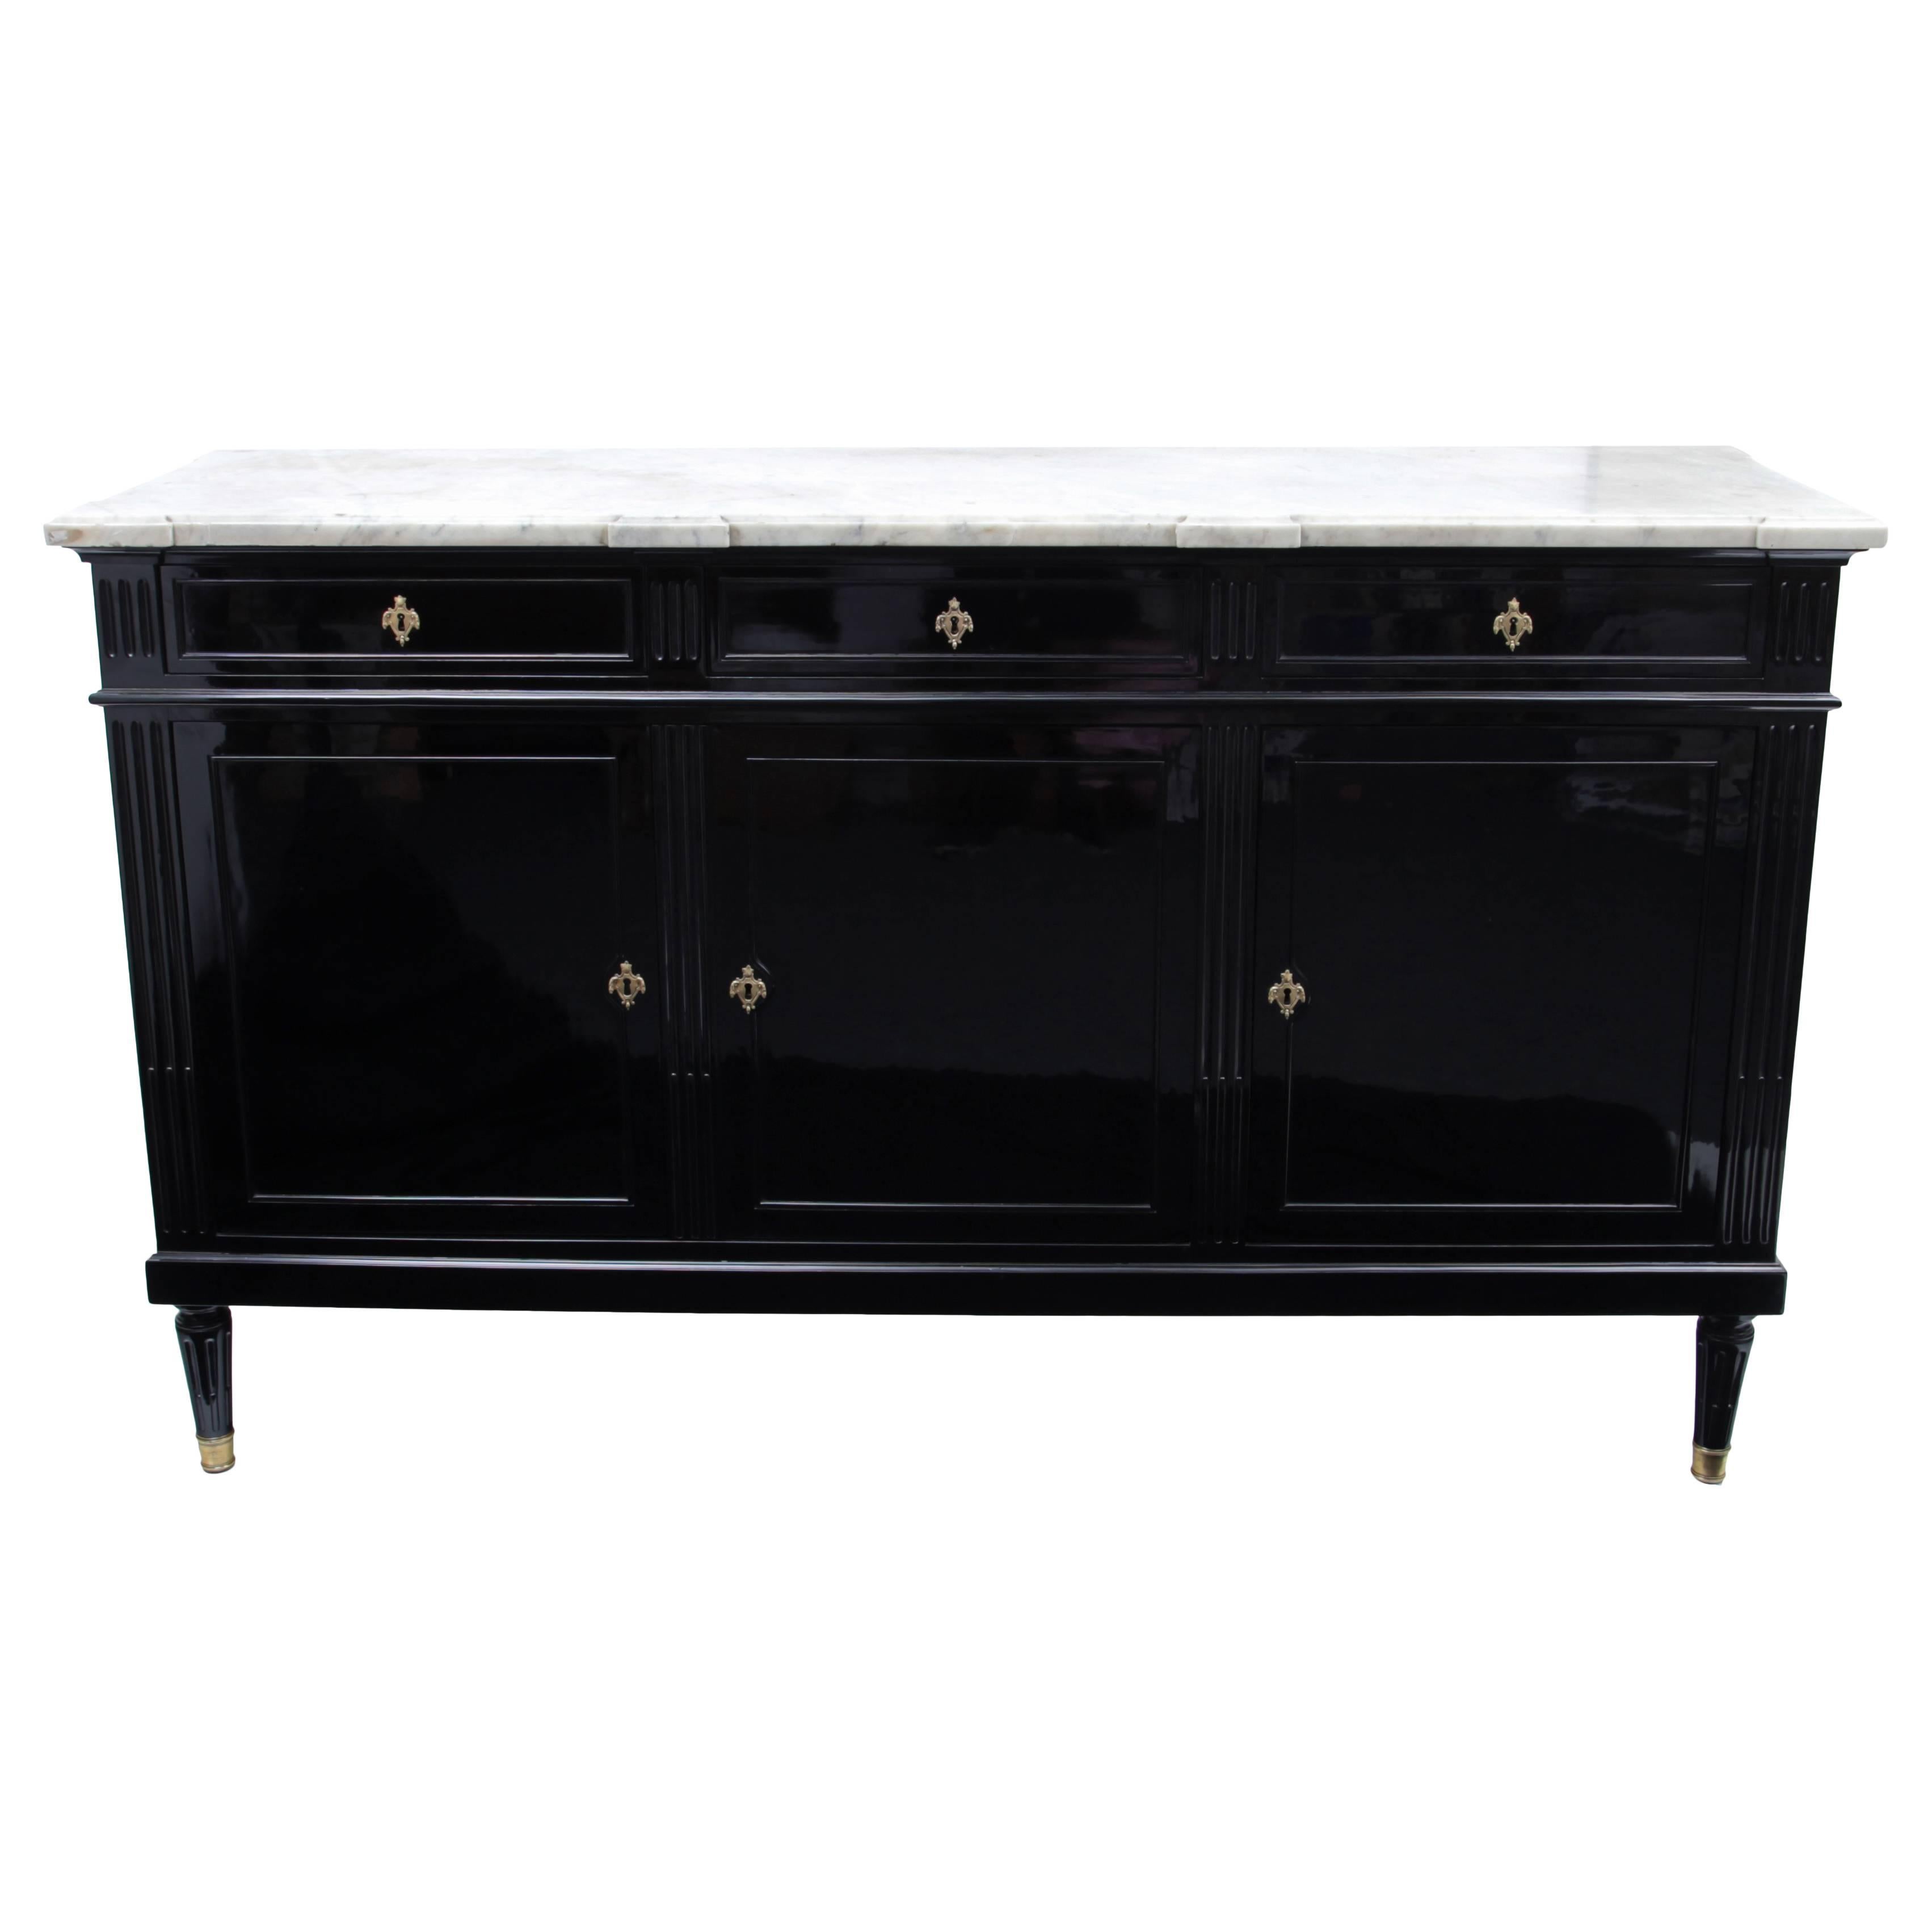 Completely ebonized sideboard with white marble top. The corpus has three doors and three top drawers with bronze escutcheons. The corners are in the shape of pilasters with fluted shafts. The legs are baluster-shaped and have bronze caps.